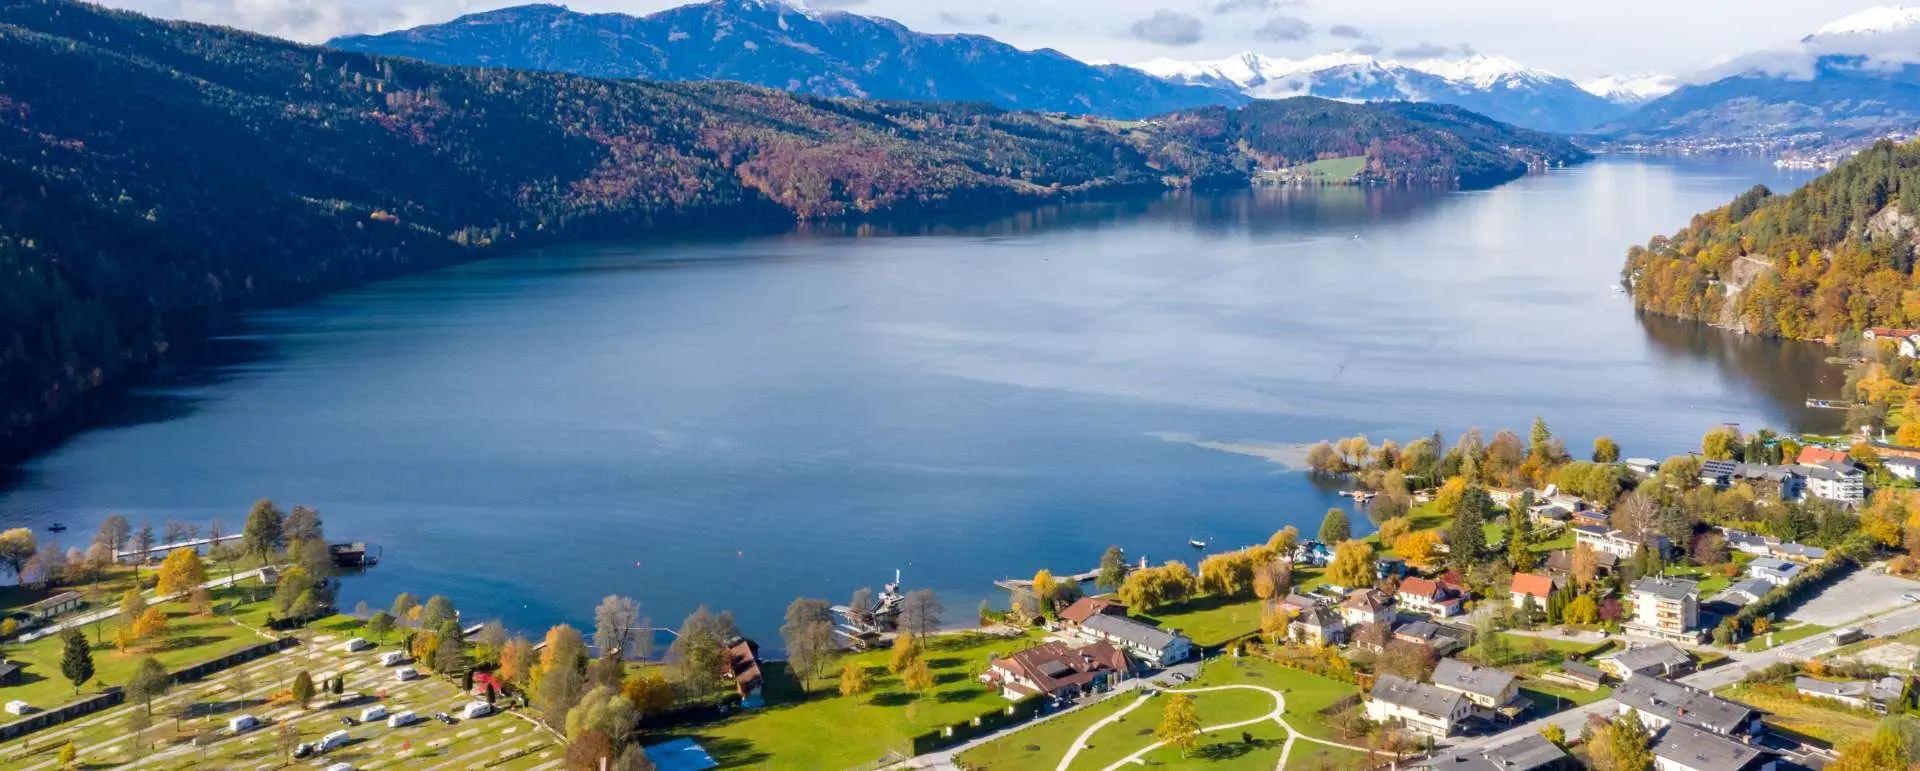 Millstätter See - the destination for families